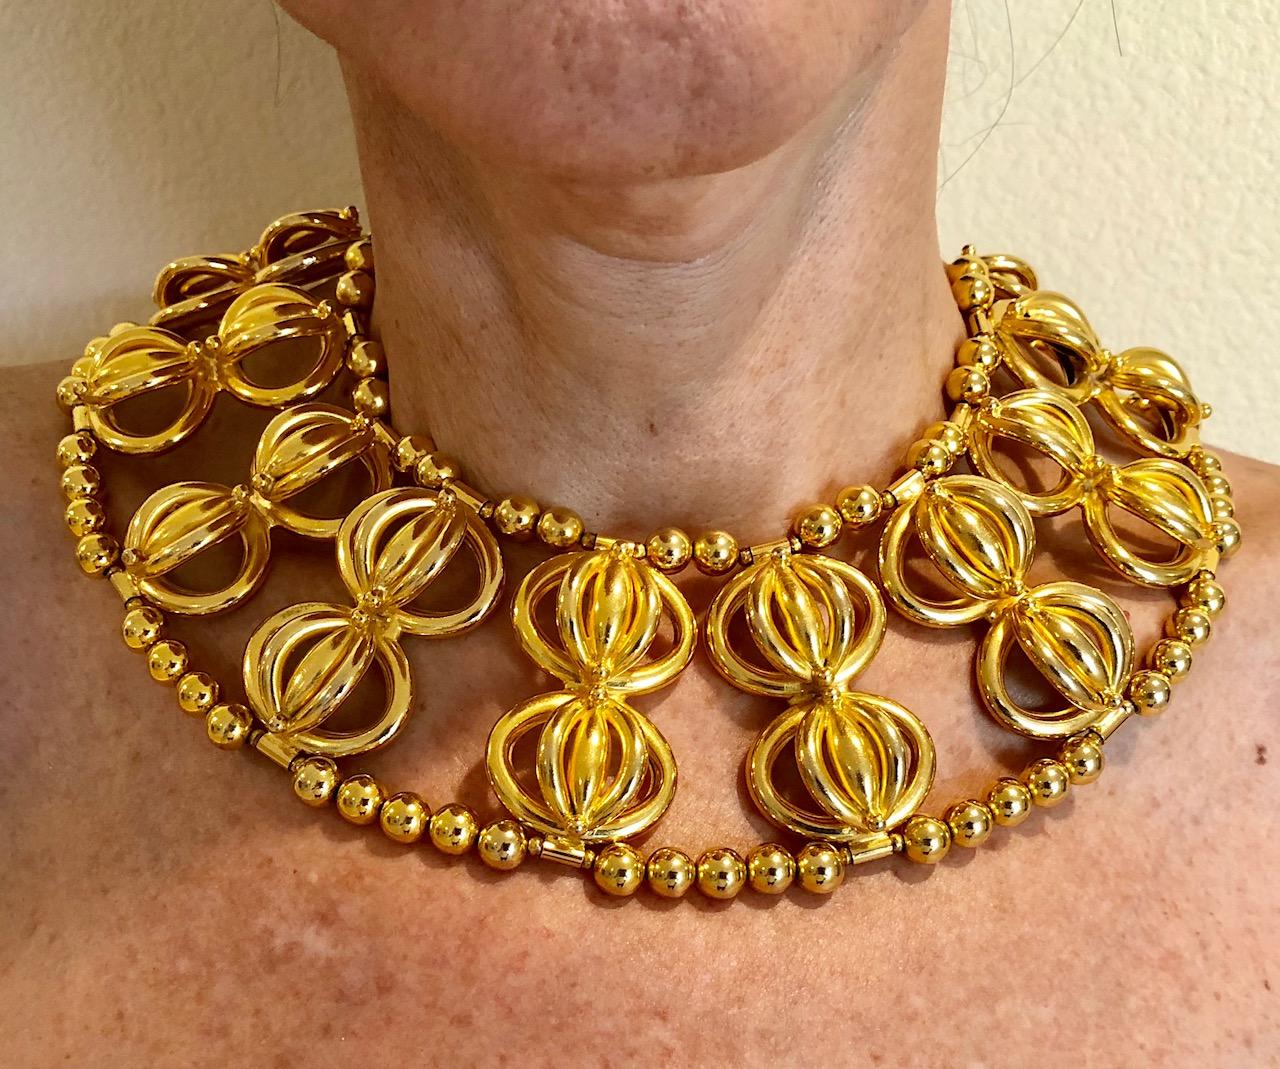 Chic and fashion current sculptural statement bib necklace by William de Lillo. The monumental necklace is comprised out of gold-tone metal beads which are adorned by architectural domes, the necklaces wow factor comes from the combination of all